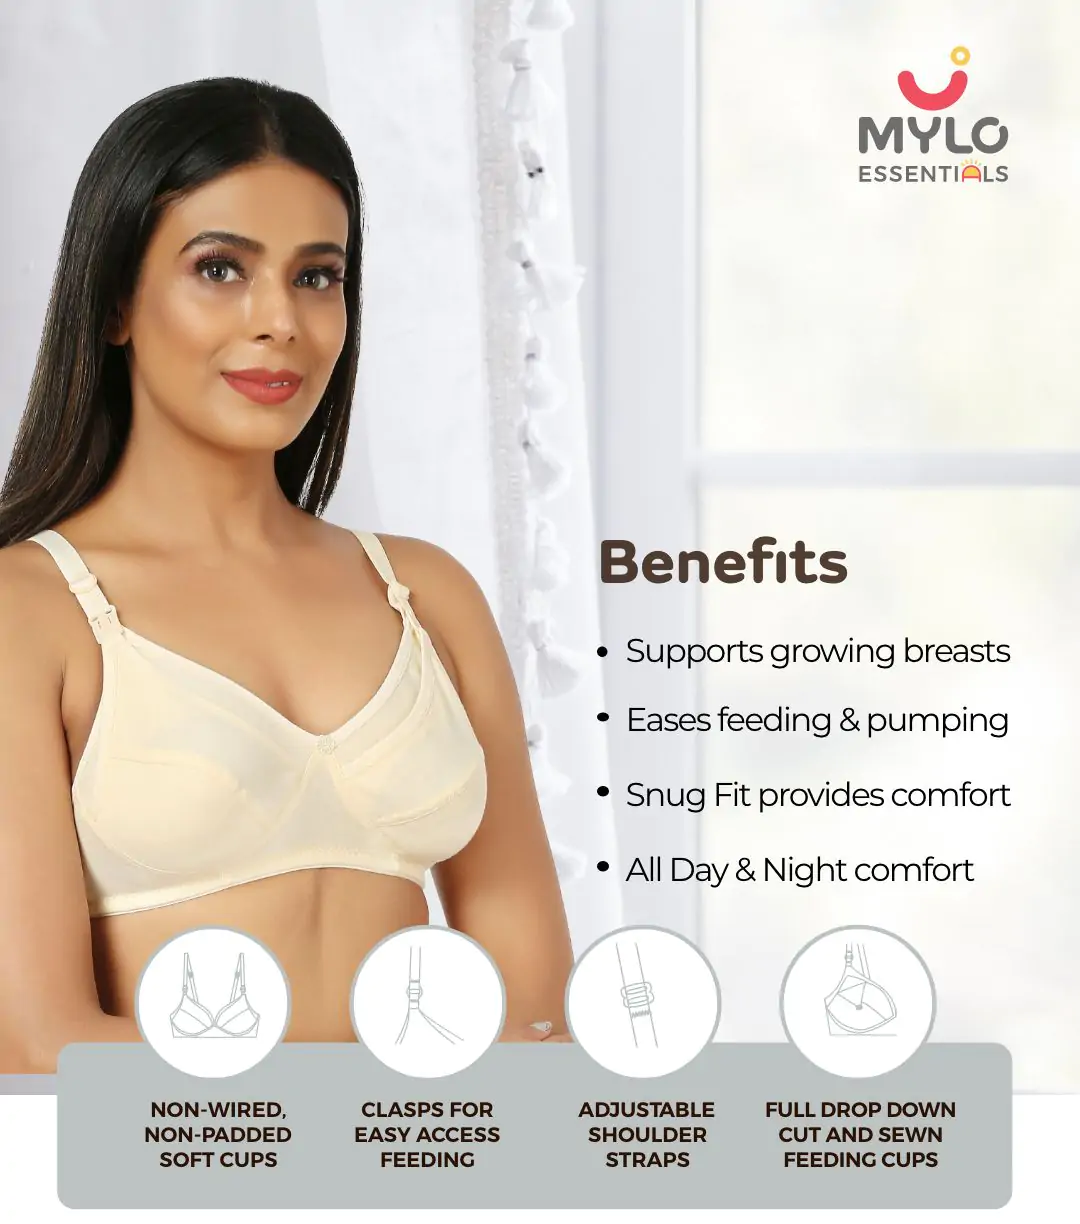 Non-Wired Non-Padded Maternity Bra/Feeding Bra with Free Bra Extender | Supports Growing Breasts | Eases Pumping & Feeding | Classic Black, Classic White, Magnolia Cream 32B about banner